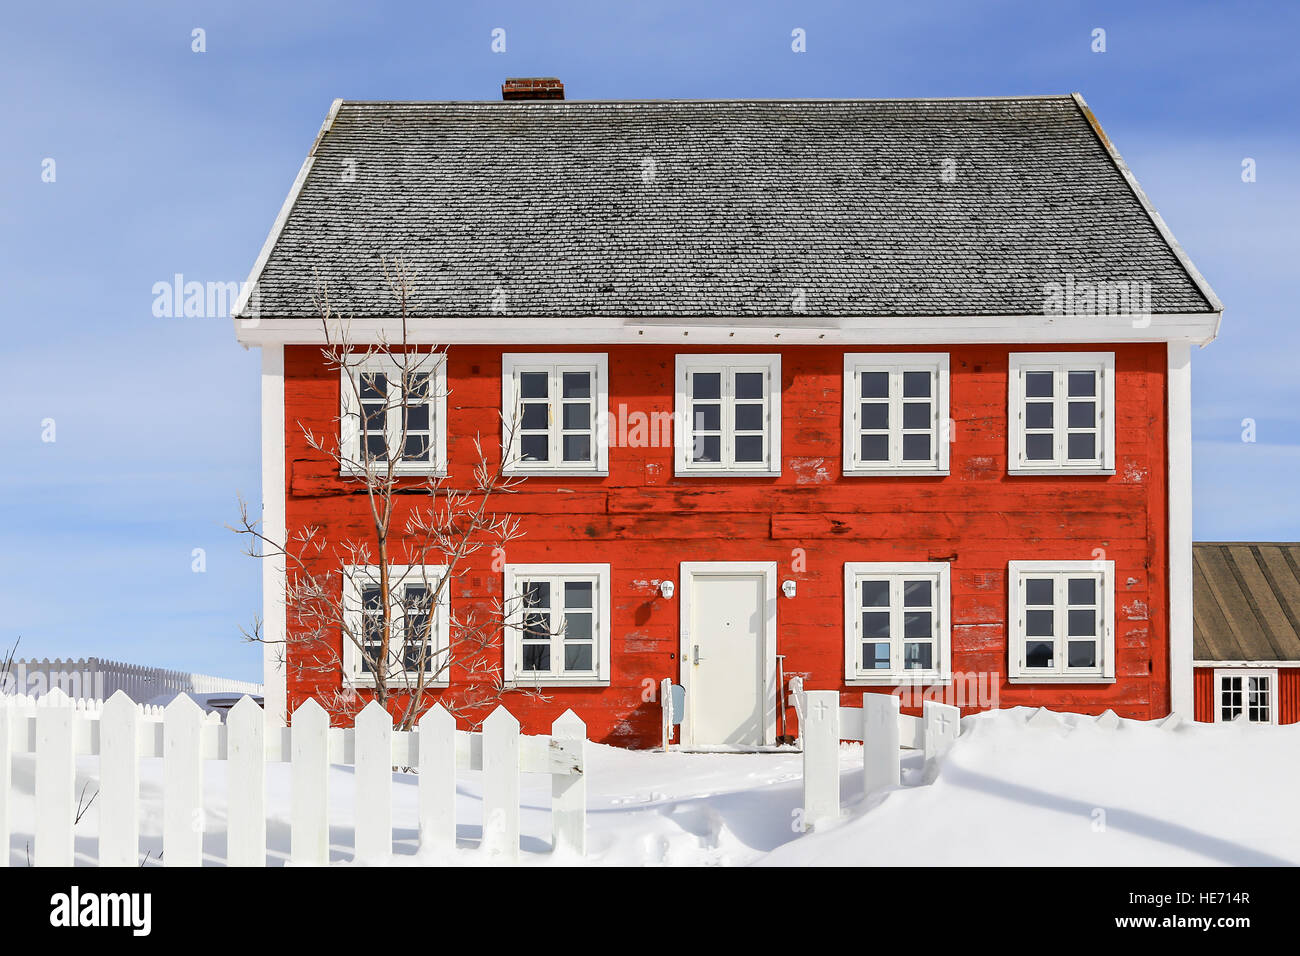 Santa Claus house and one of a few tree in Nuuk, Greenland Stock Photo